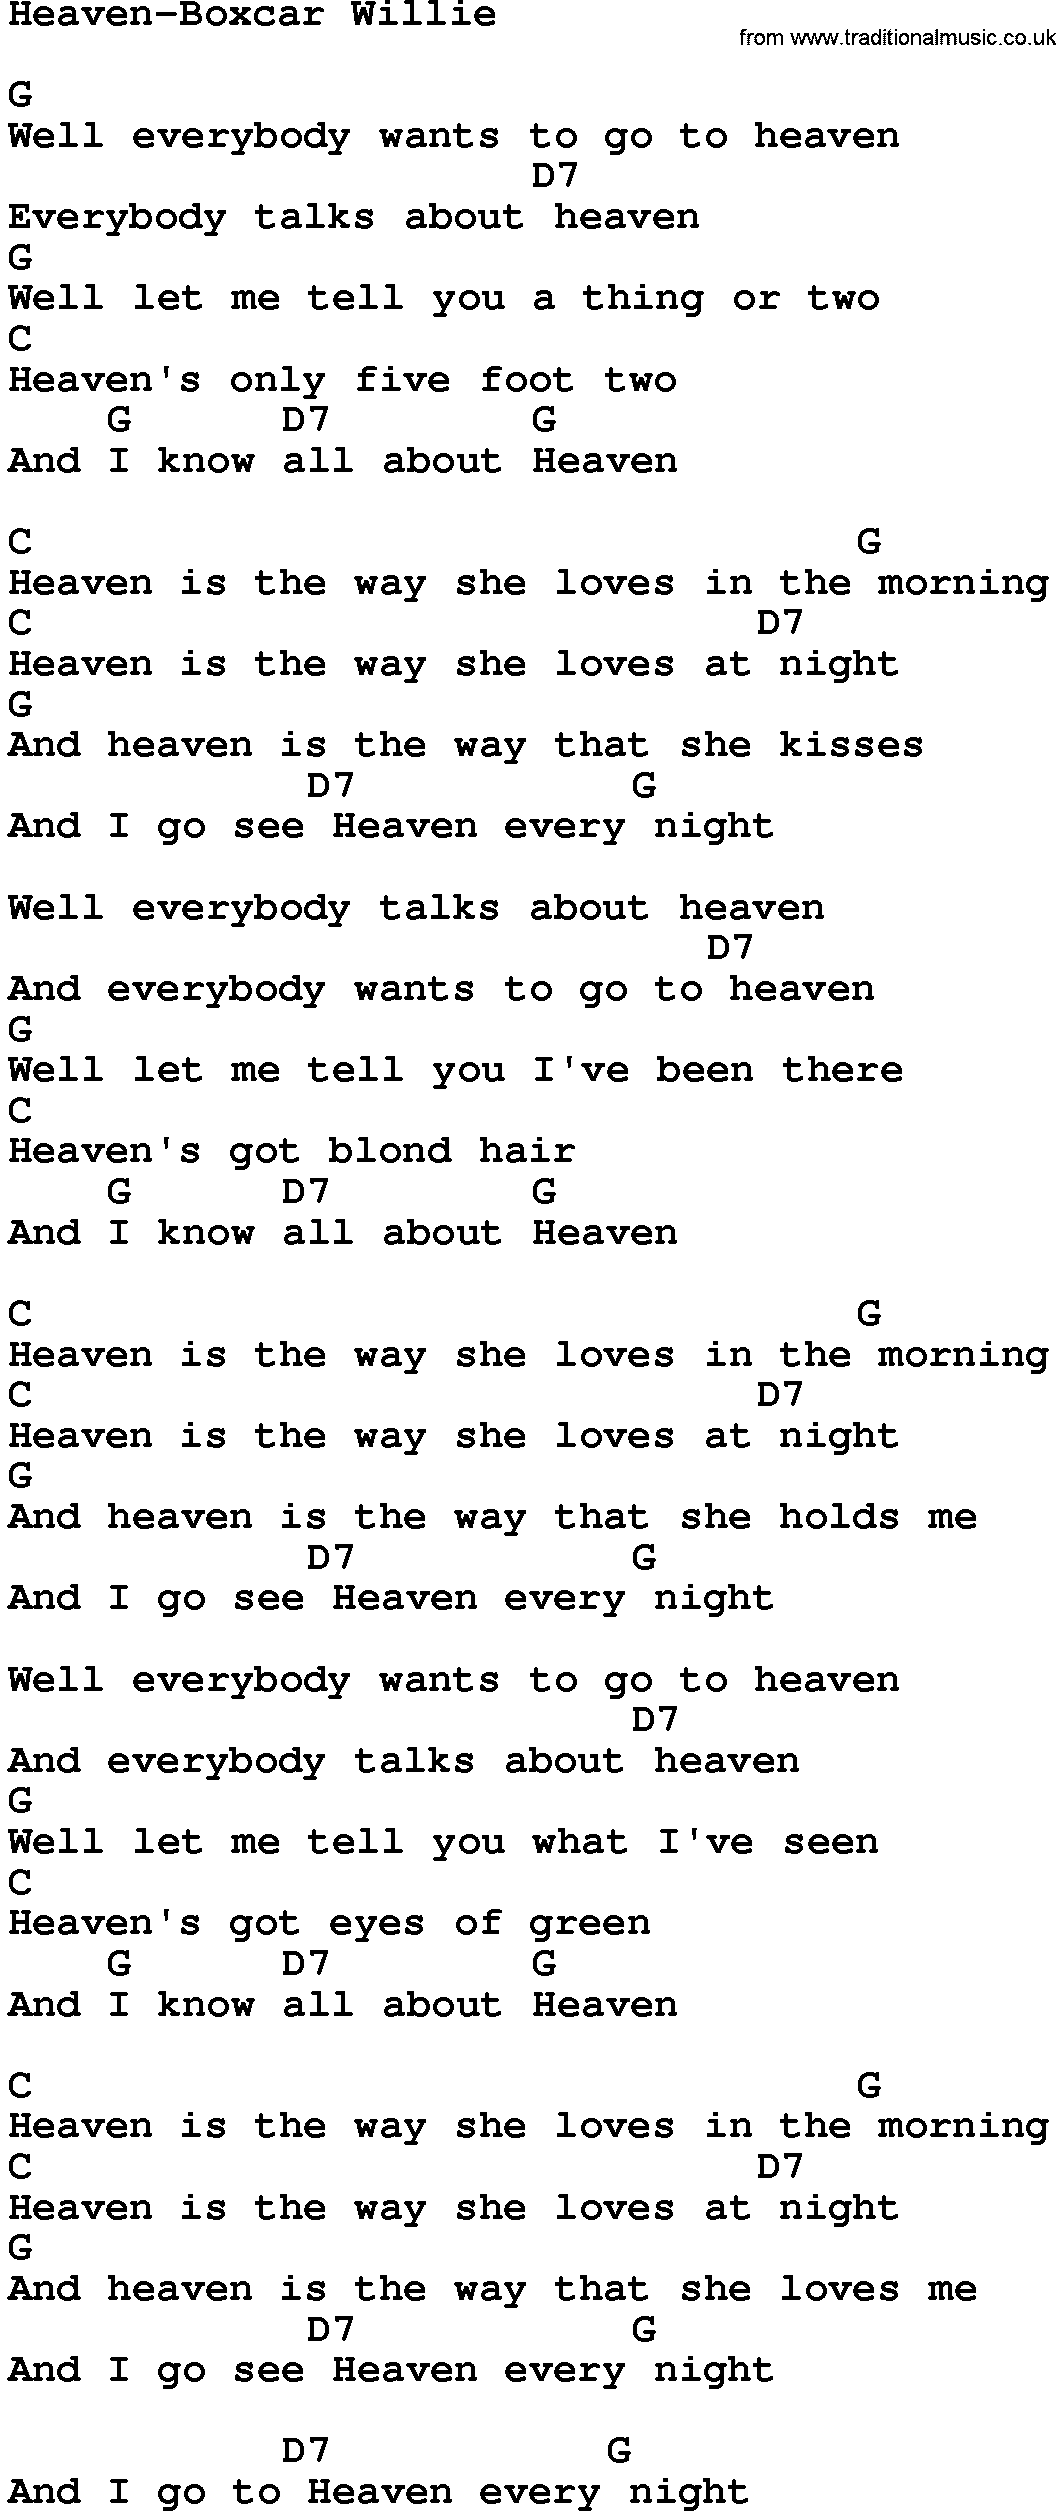 Country music song: Heaven-Boxcar Willie lyrics and chords